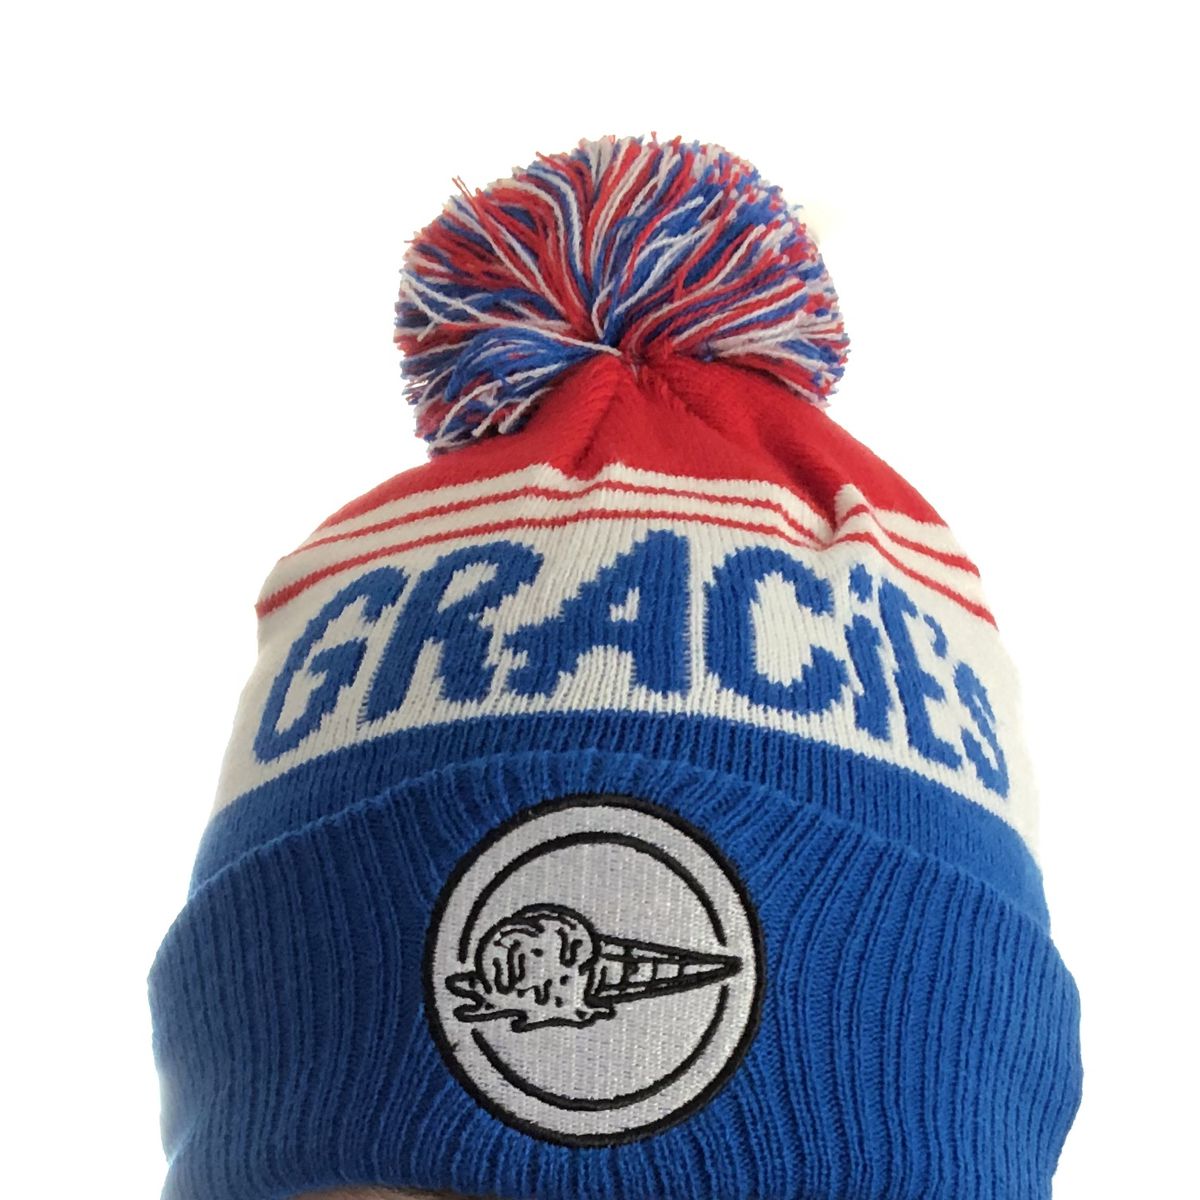 A winter hat with a pom pom in red, white, and blue. Text reads “Gracie’s,” and there’s an image of a melting ice cream cone on a patch on the front.